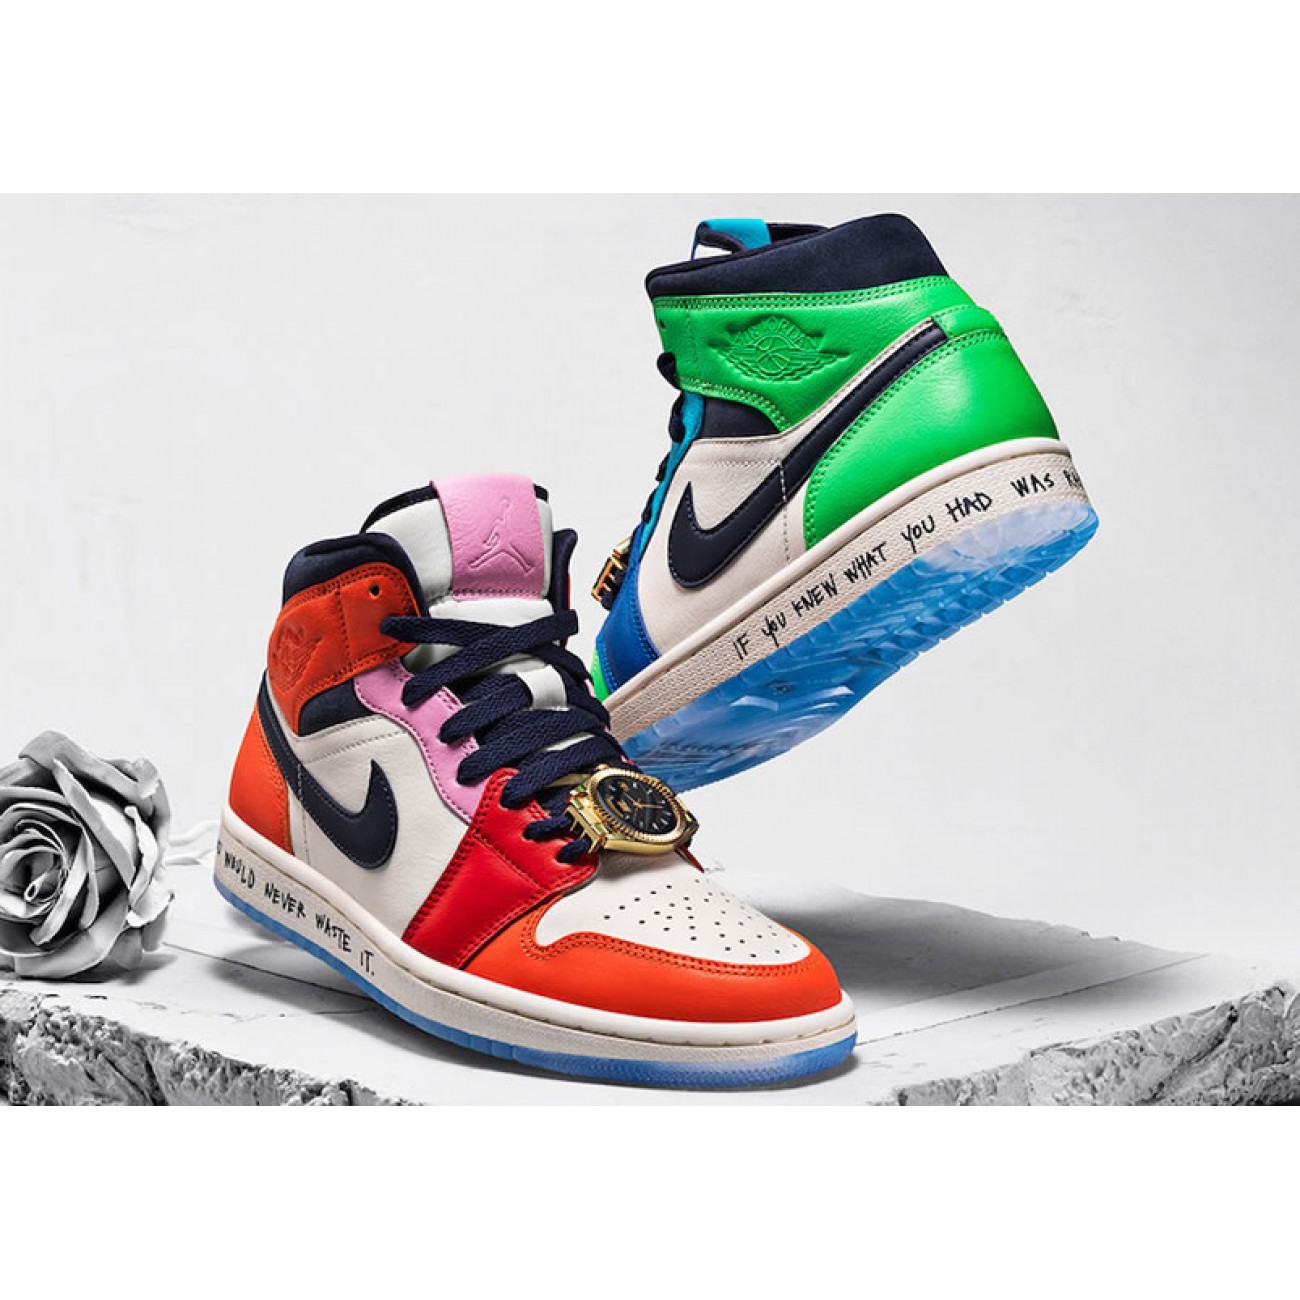 Melody Ehsani x Air Jordan 1 Mid WMNS "Fearless" Outfit Release Date CQ7629-100